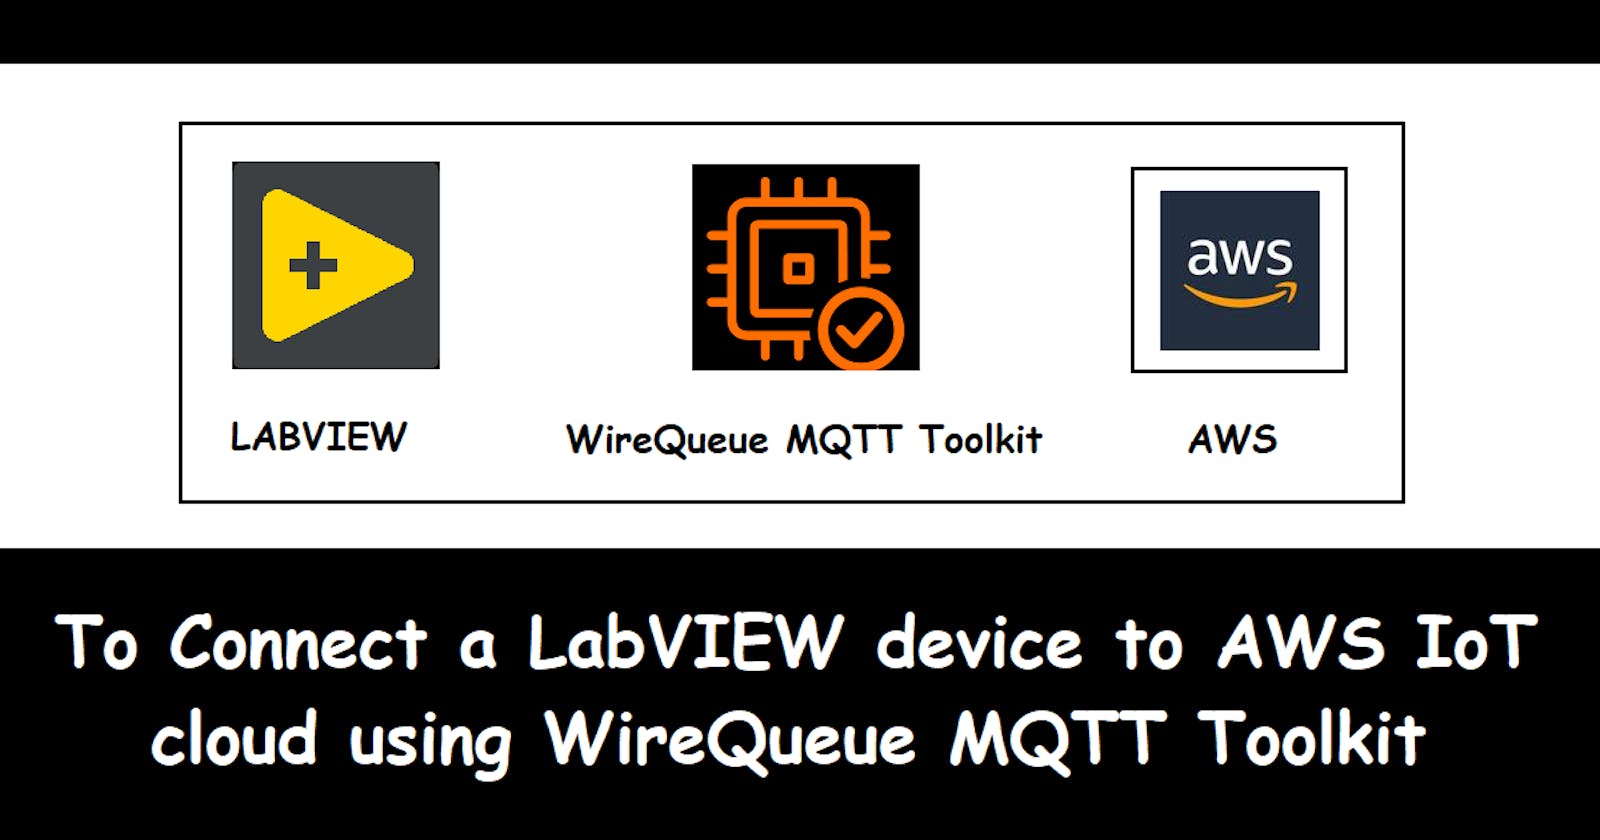 To Connect a LabVIEW device to AWS IoT cloud using WireQueue MQTT Toolkit